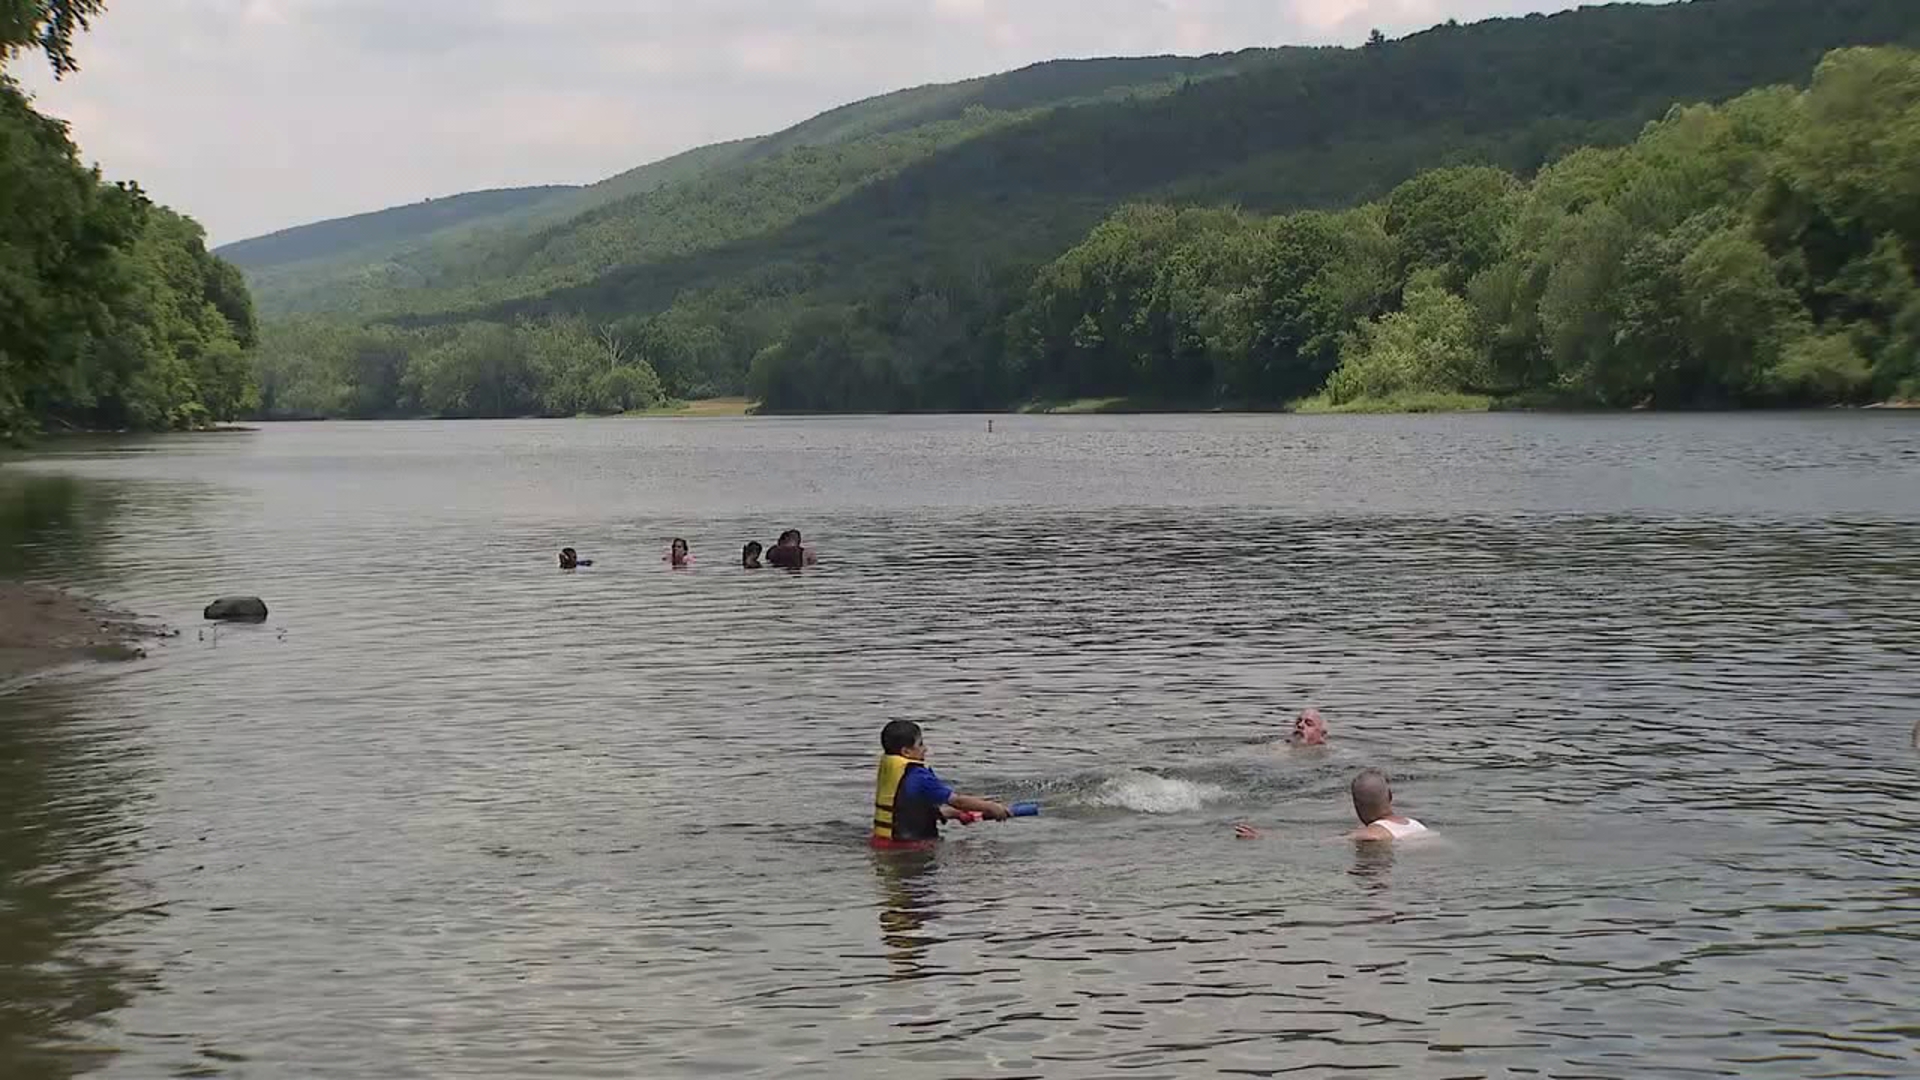 It's another scorching hot day in the Poconos. Newswatch 16's Emily Kress takes us to Smithfield Beach, where many people are trying to stay cool.